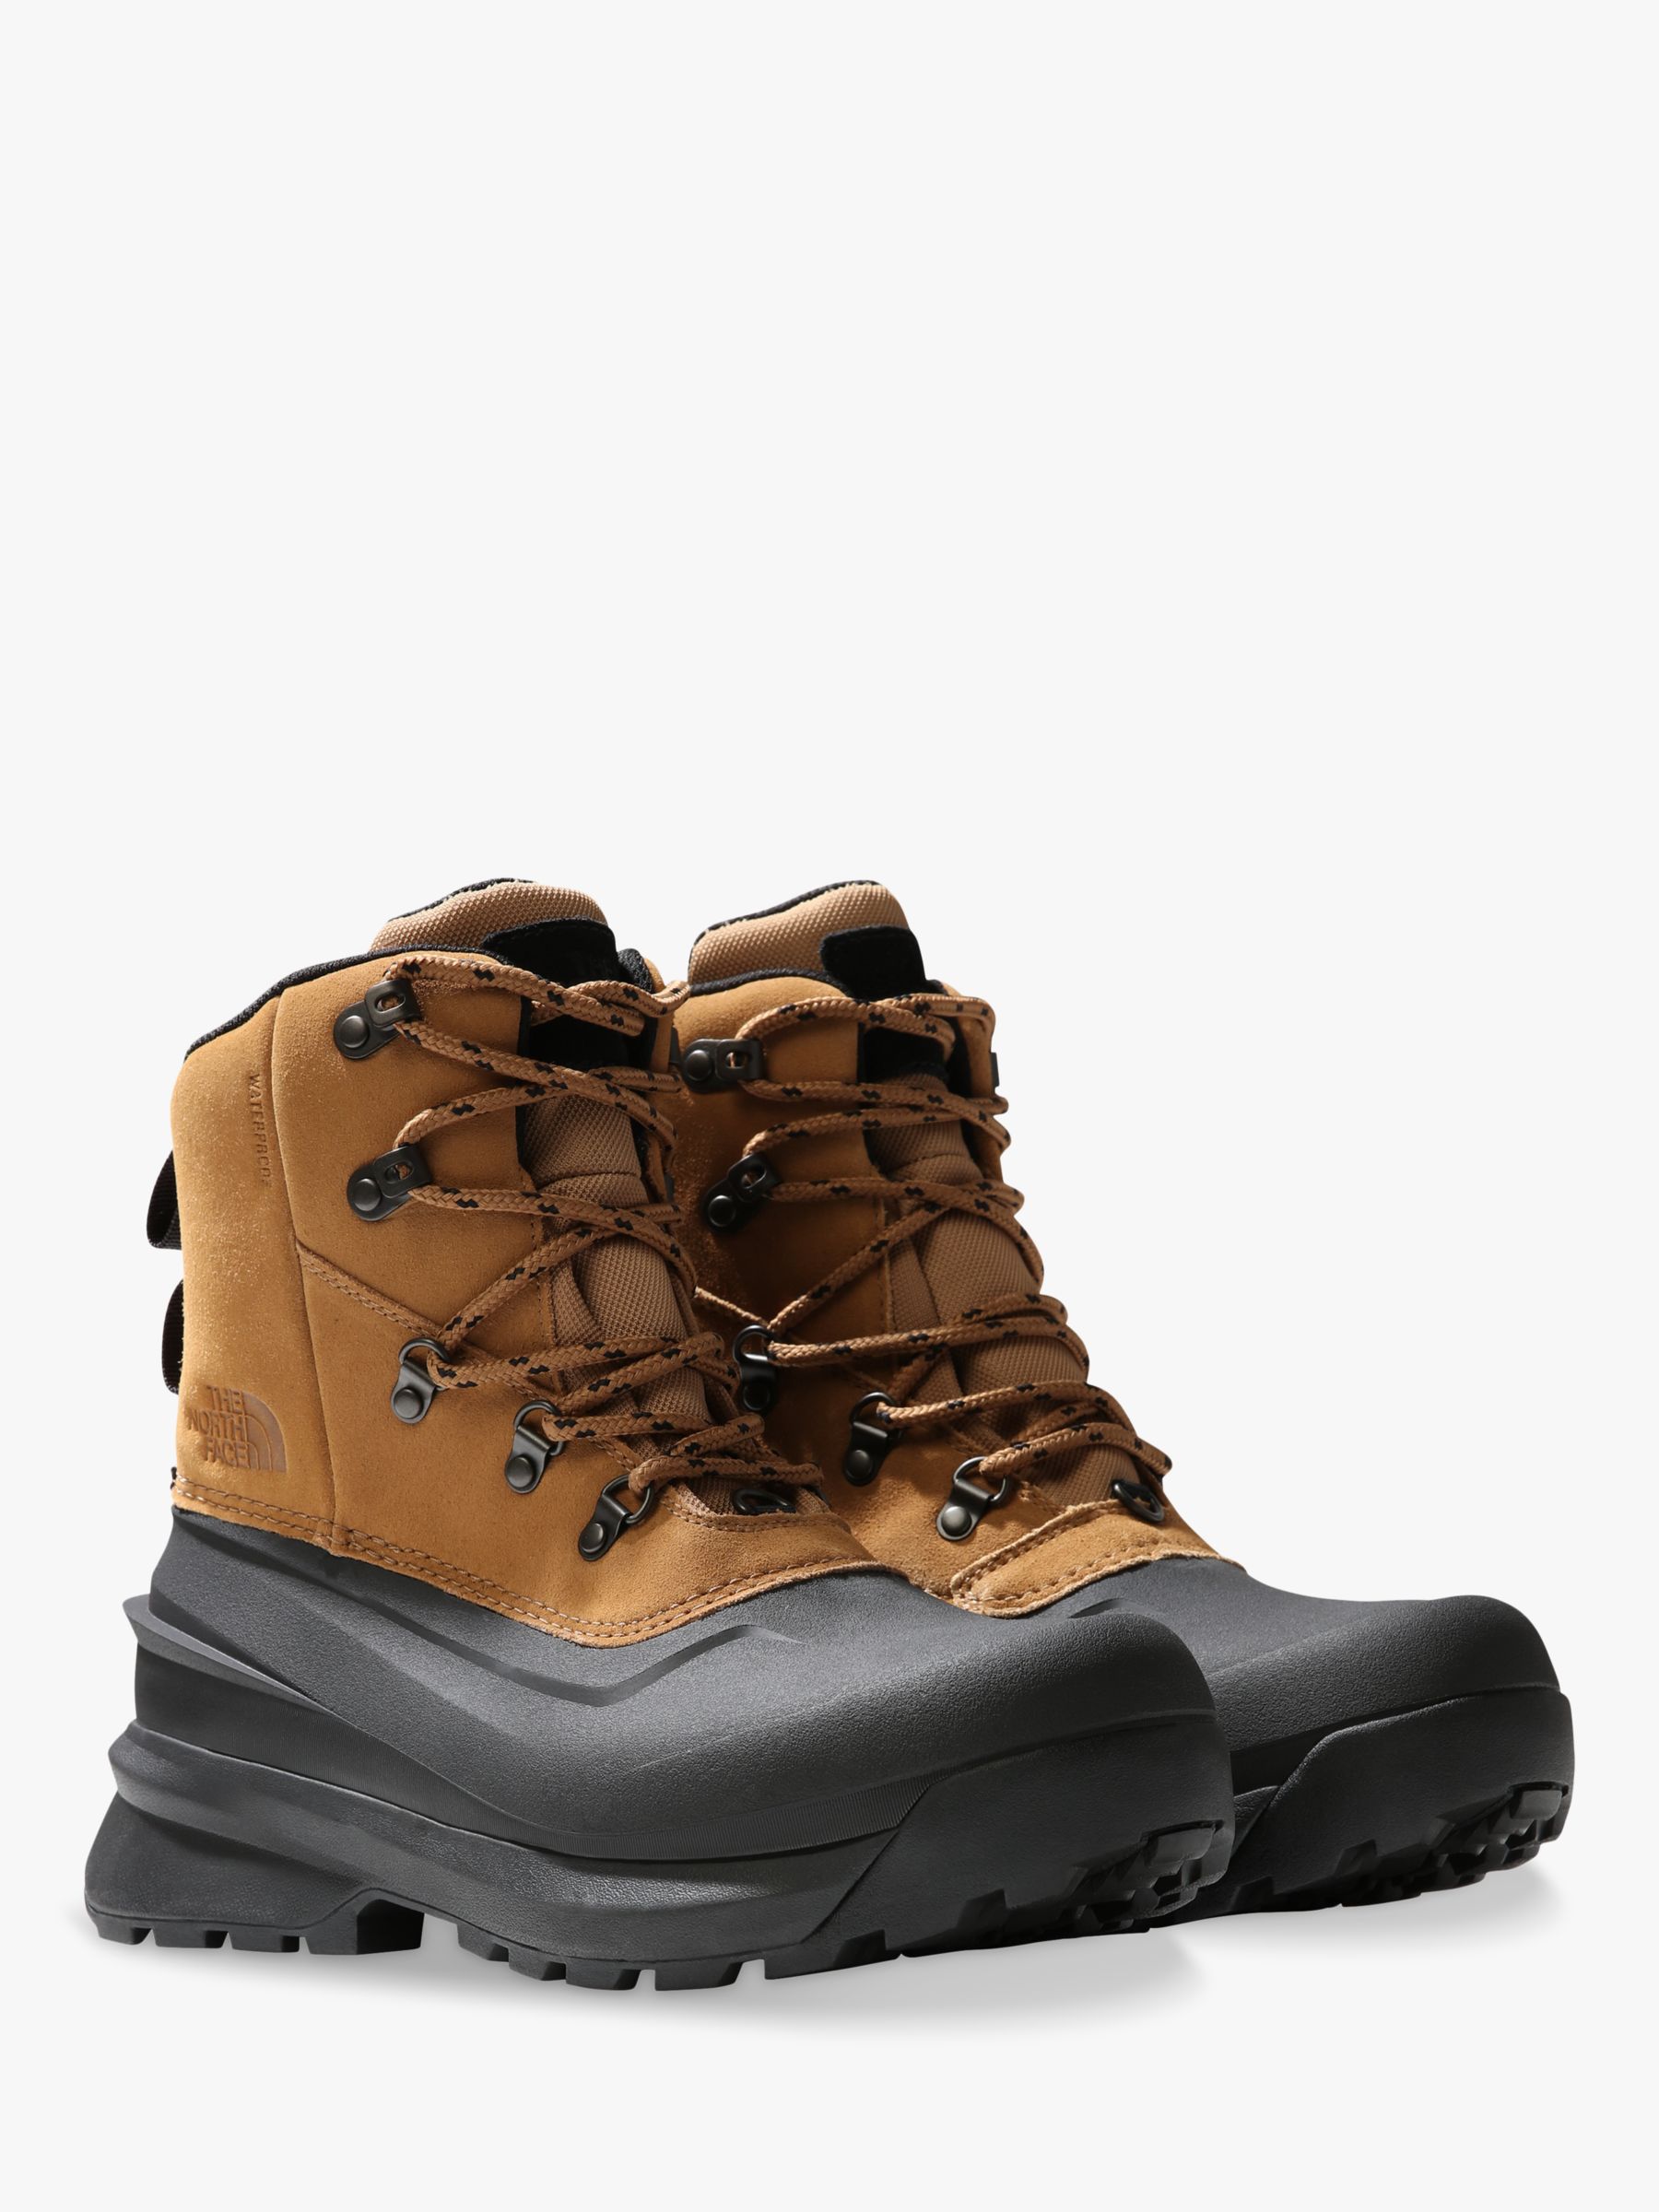 Buy The North Face Chilkat V Men's Waterproof Hiking Boots, Utility Brown/TFN Black Online at johnlewis.com